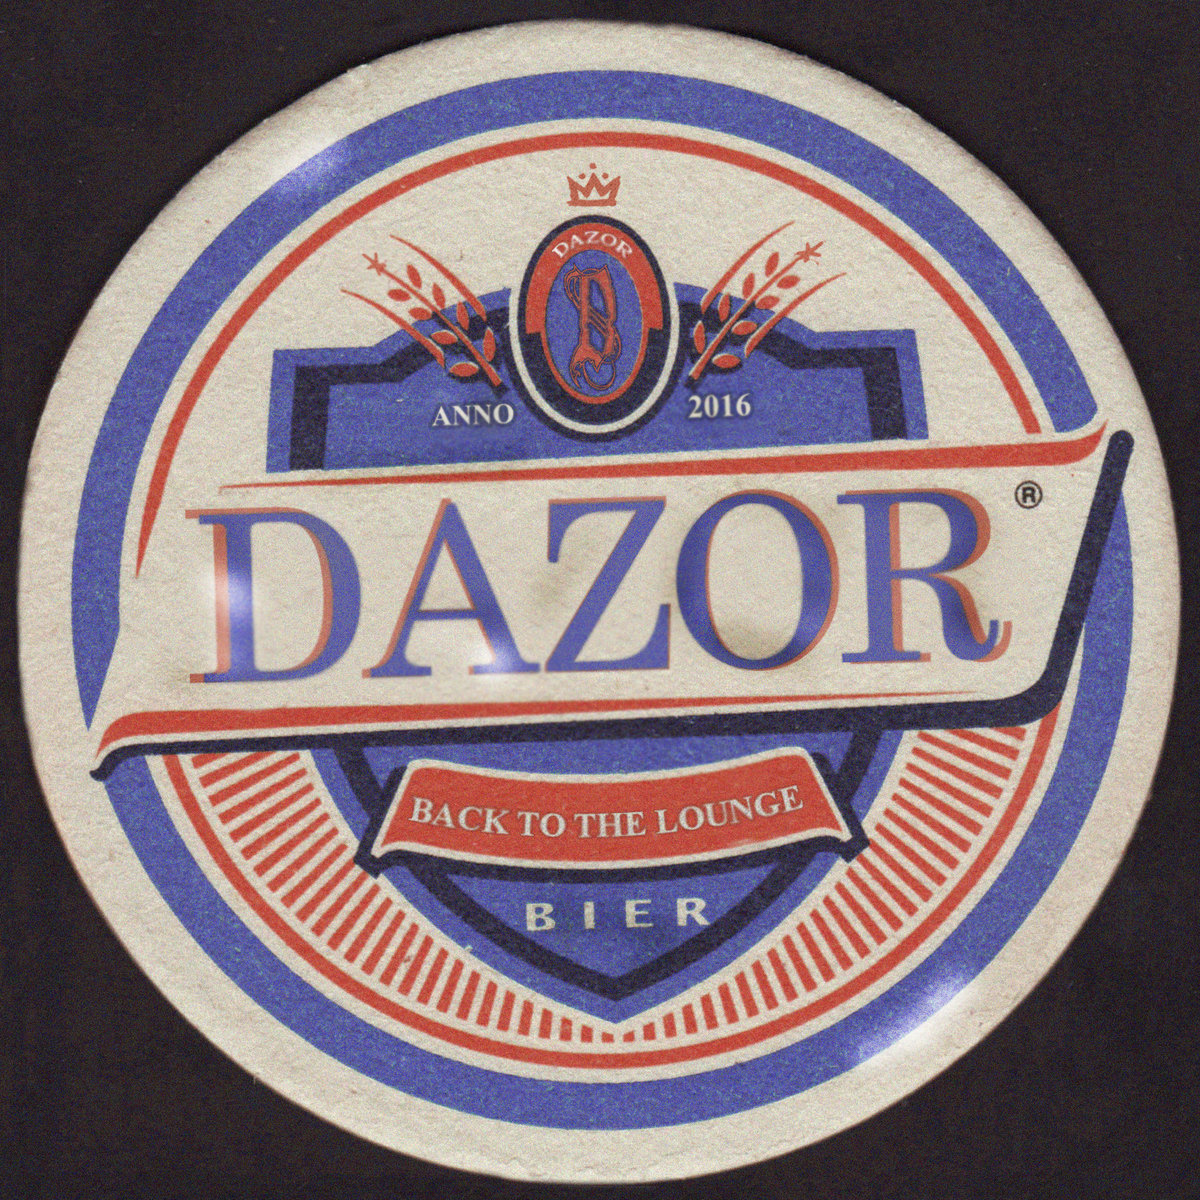  Dazor – Back To The Lounge